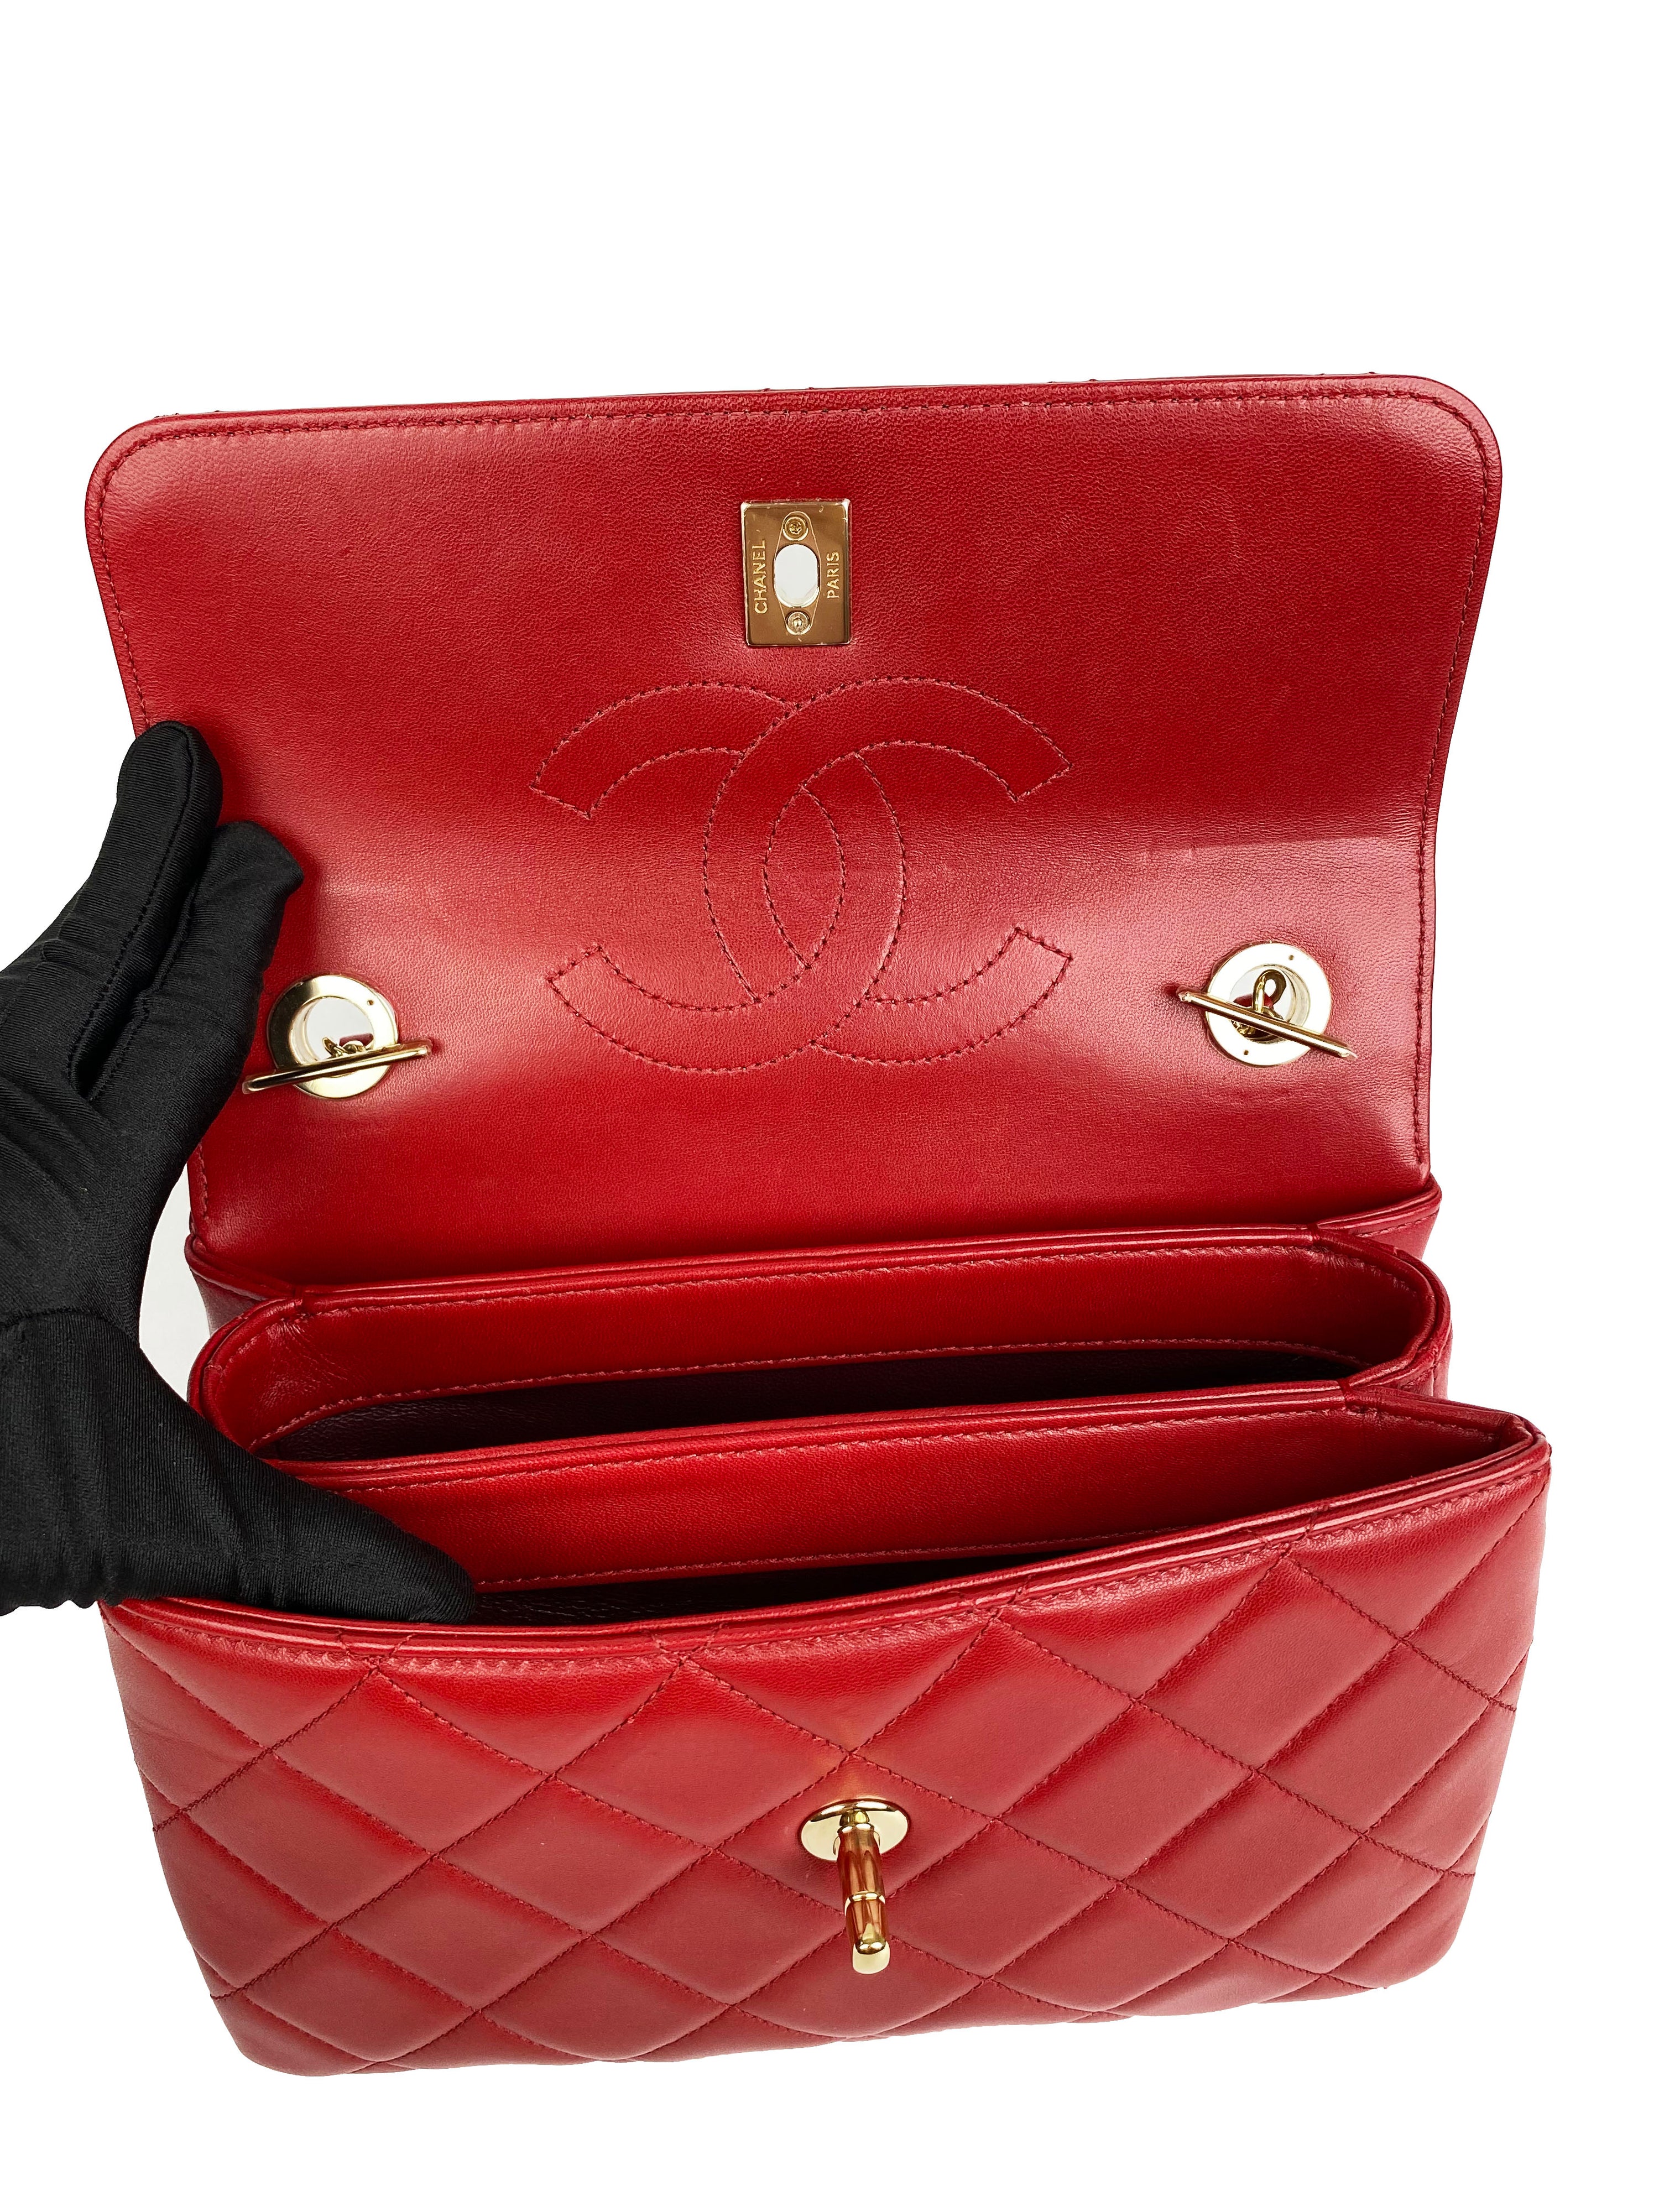 Chanel Small Red Trendy CC Bag